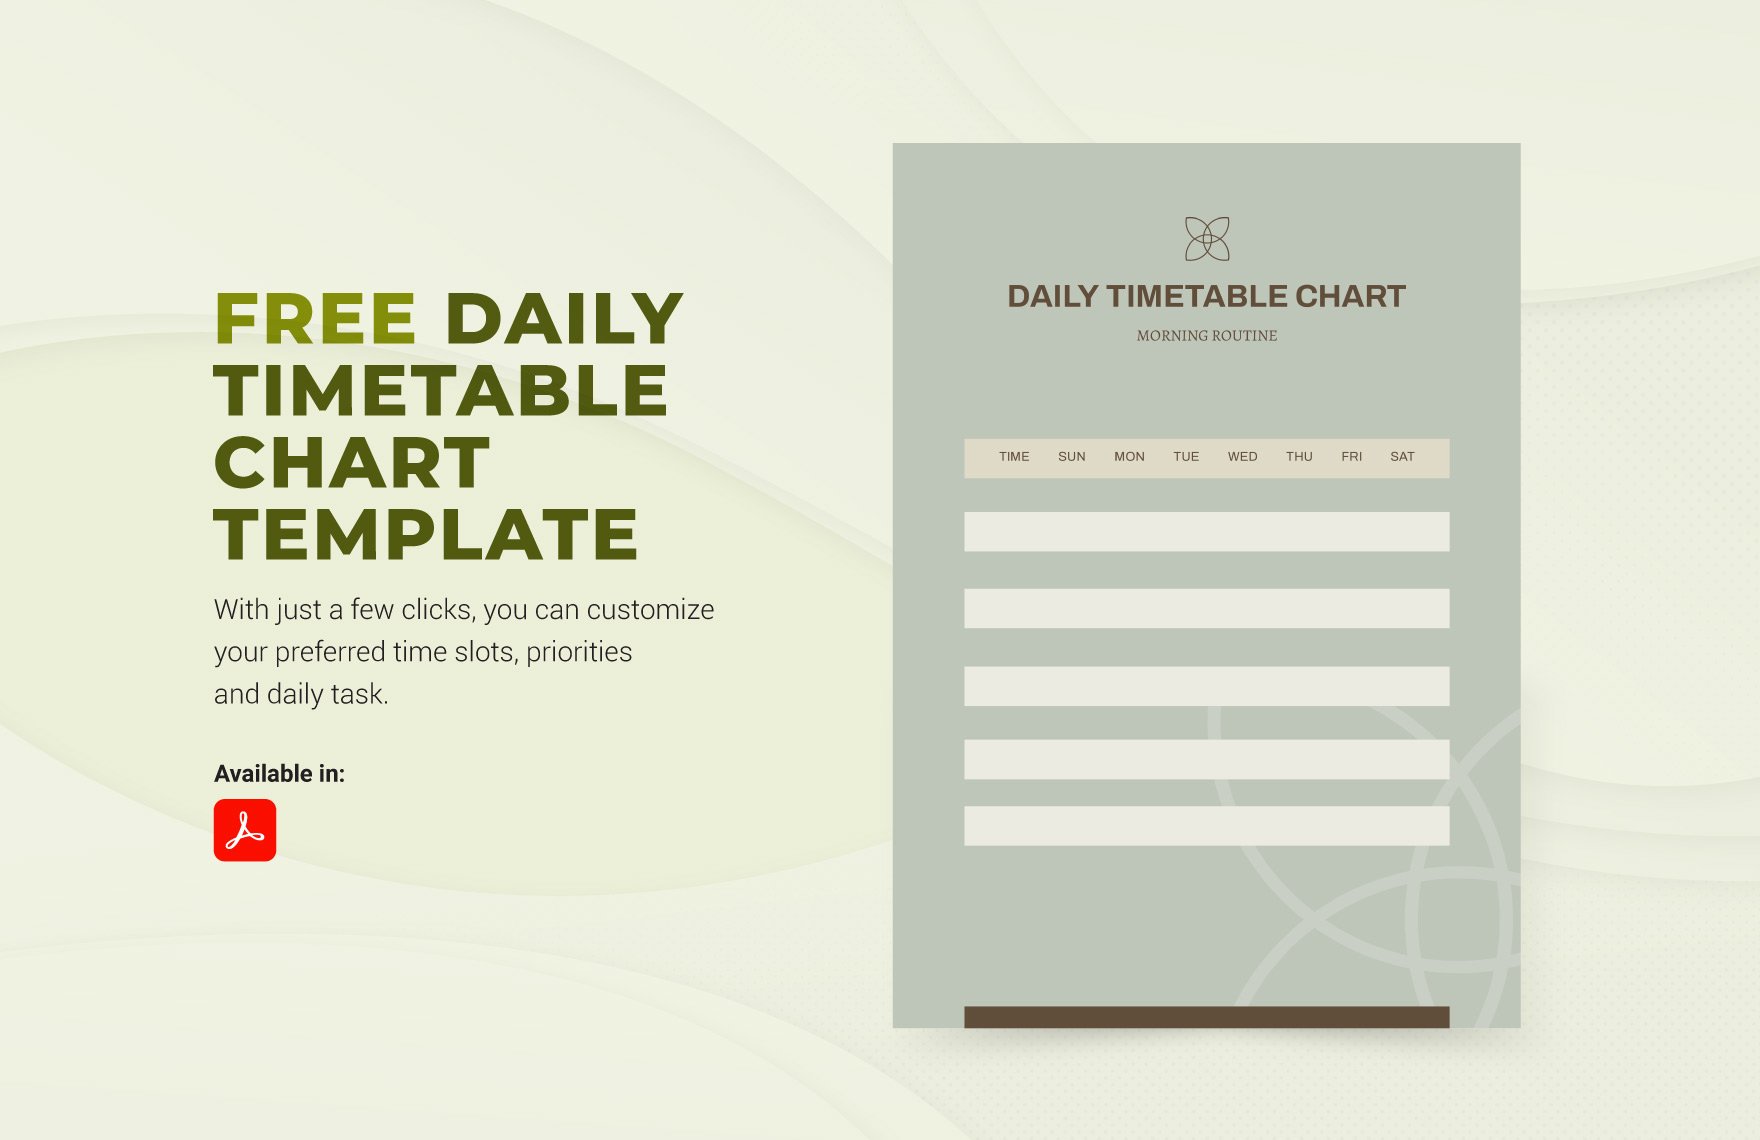 Daily Time Table Chart Template in PDF